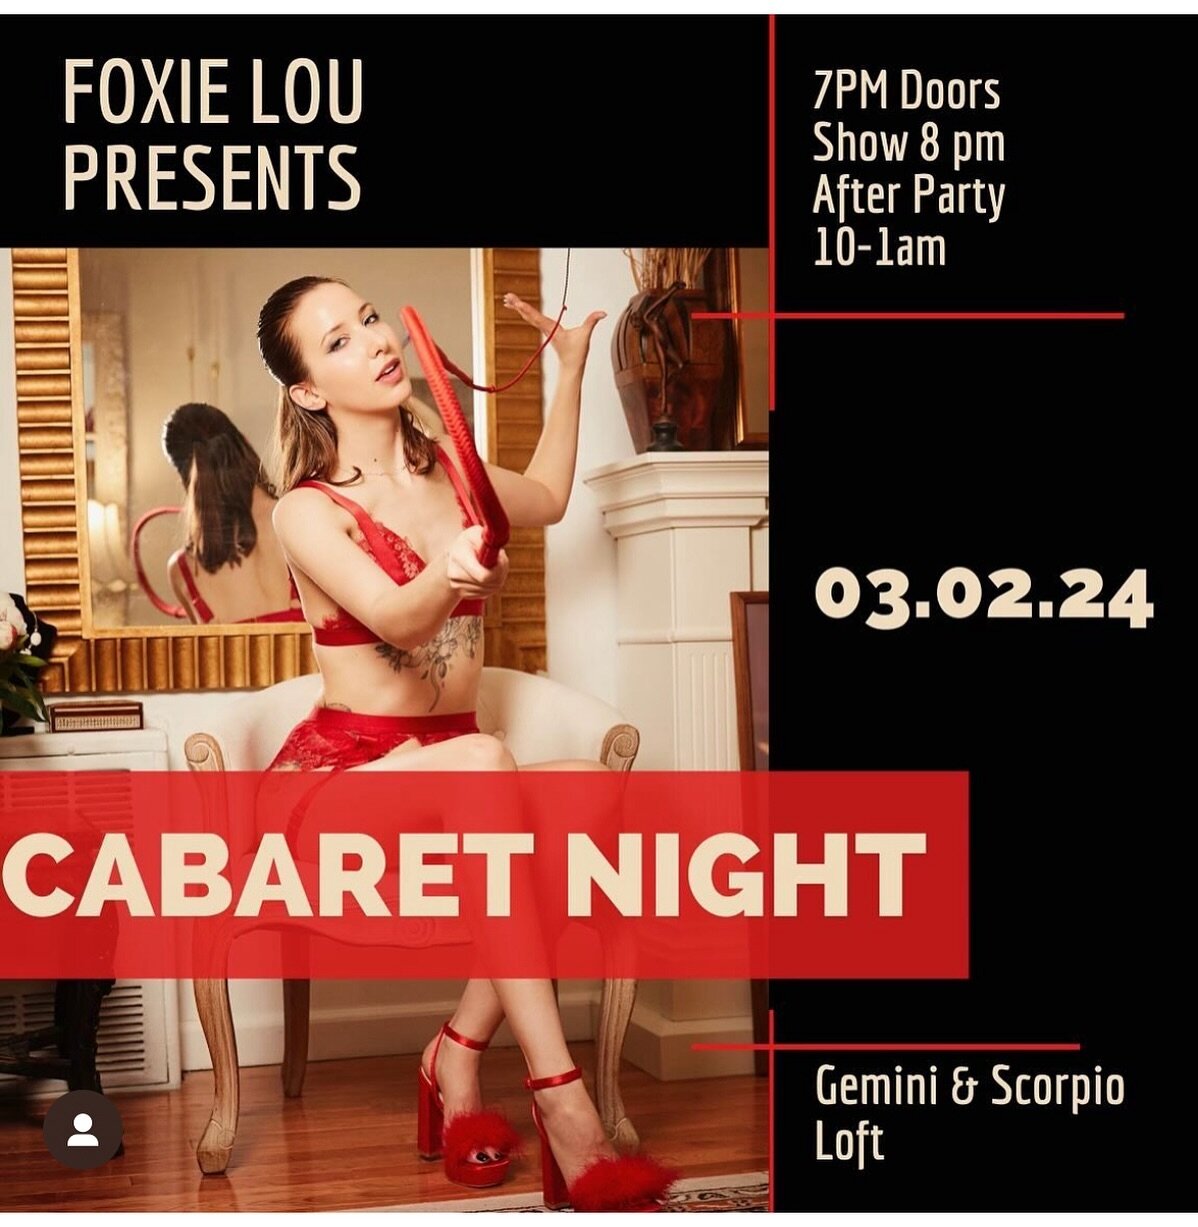 It&rsquo;s OFFICIAL!
NYC and BROOKLYN I&rsquo;m back for a short Philly minute!
I&rsquo;ll be joining the beautiful @ladyharpernyc on Saturday, March 2nd at @gemini_scorpio loft for a sexy fun Kinky Cabaret show produced by @mxfox_nyc 🌟❤️💞
 👉👉2 s